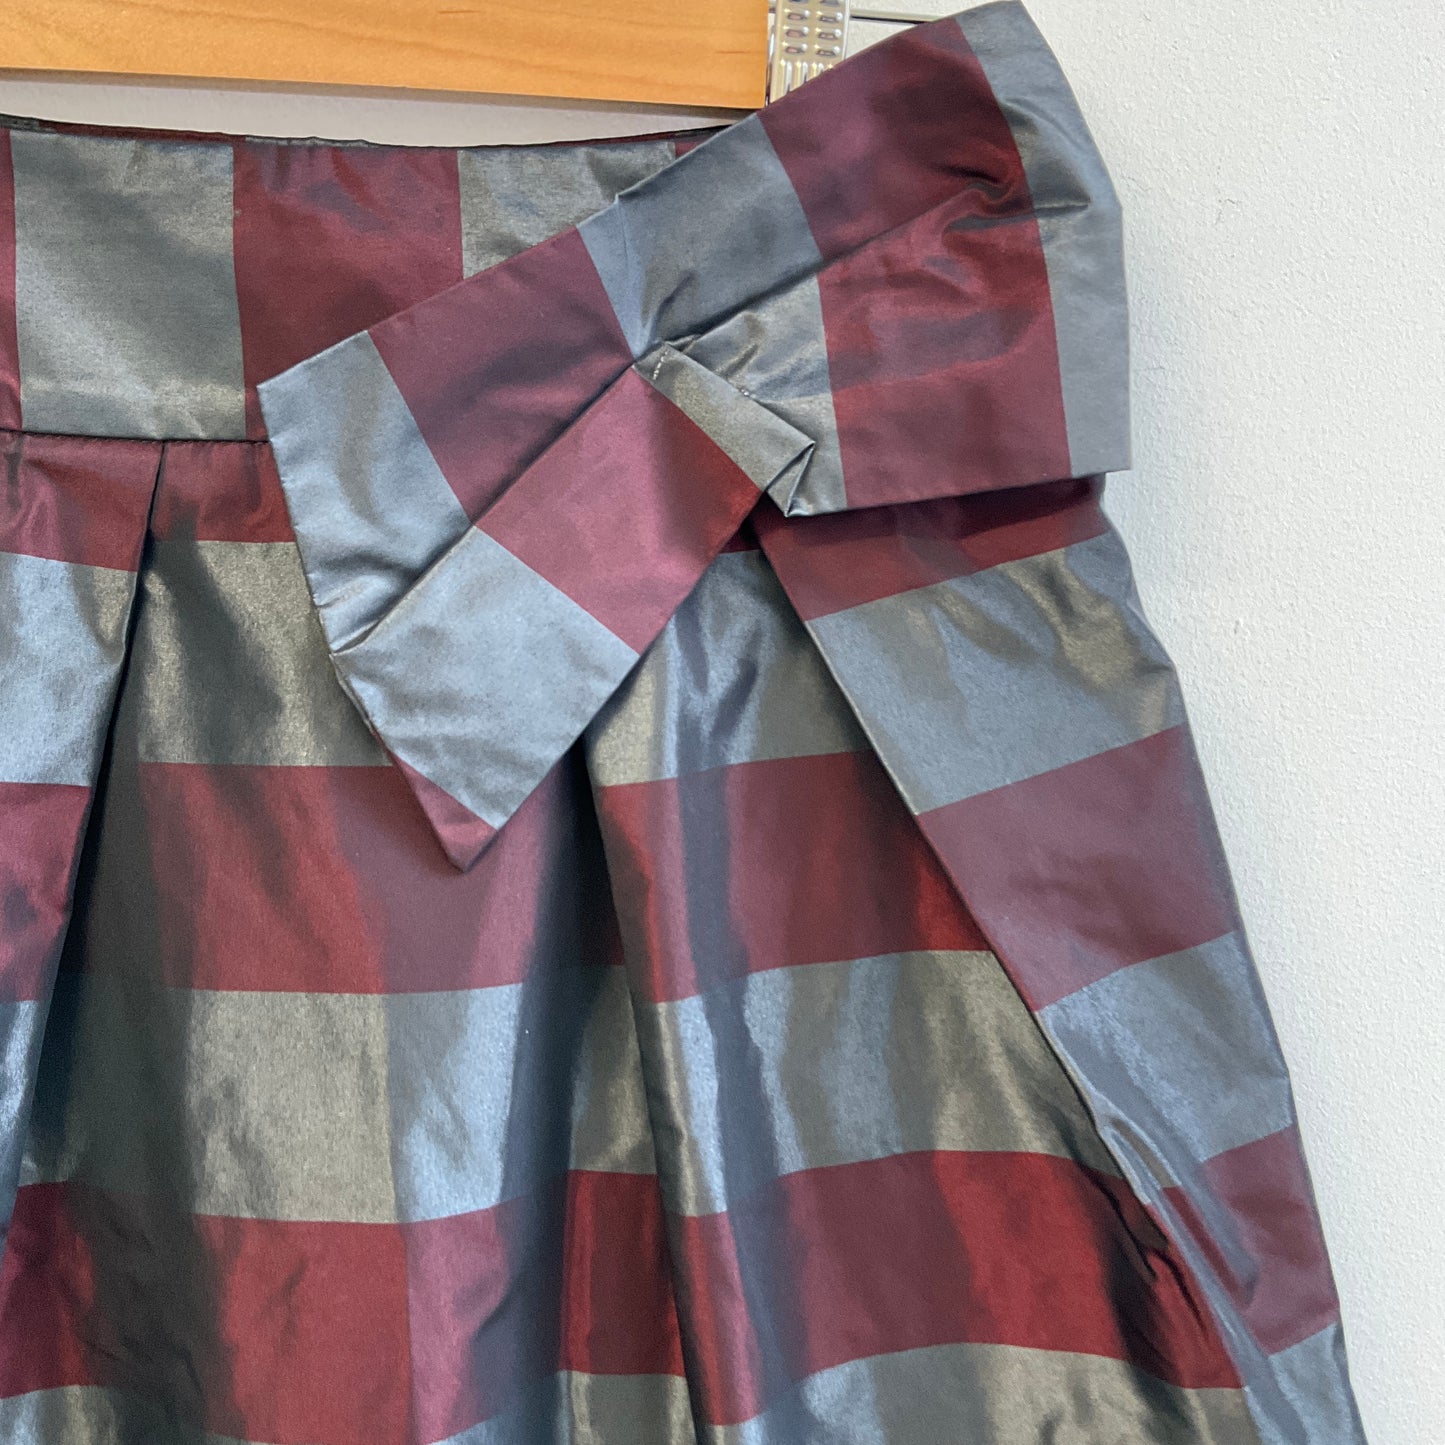 Cue - Grey/Red Striped Skirt